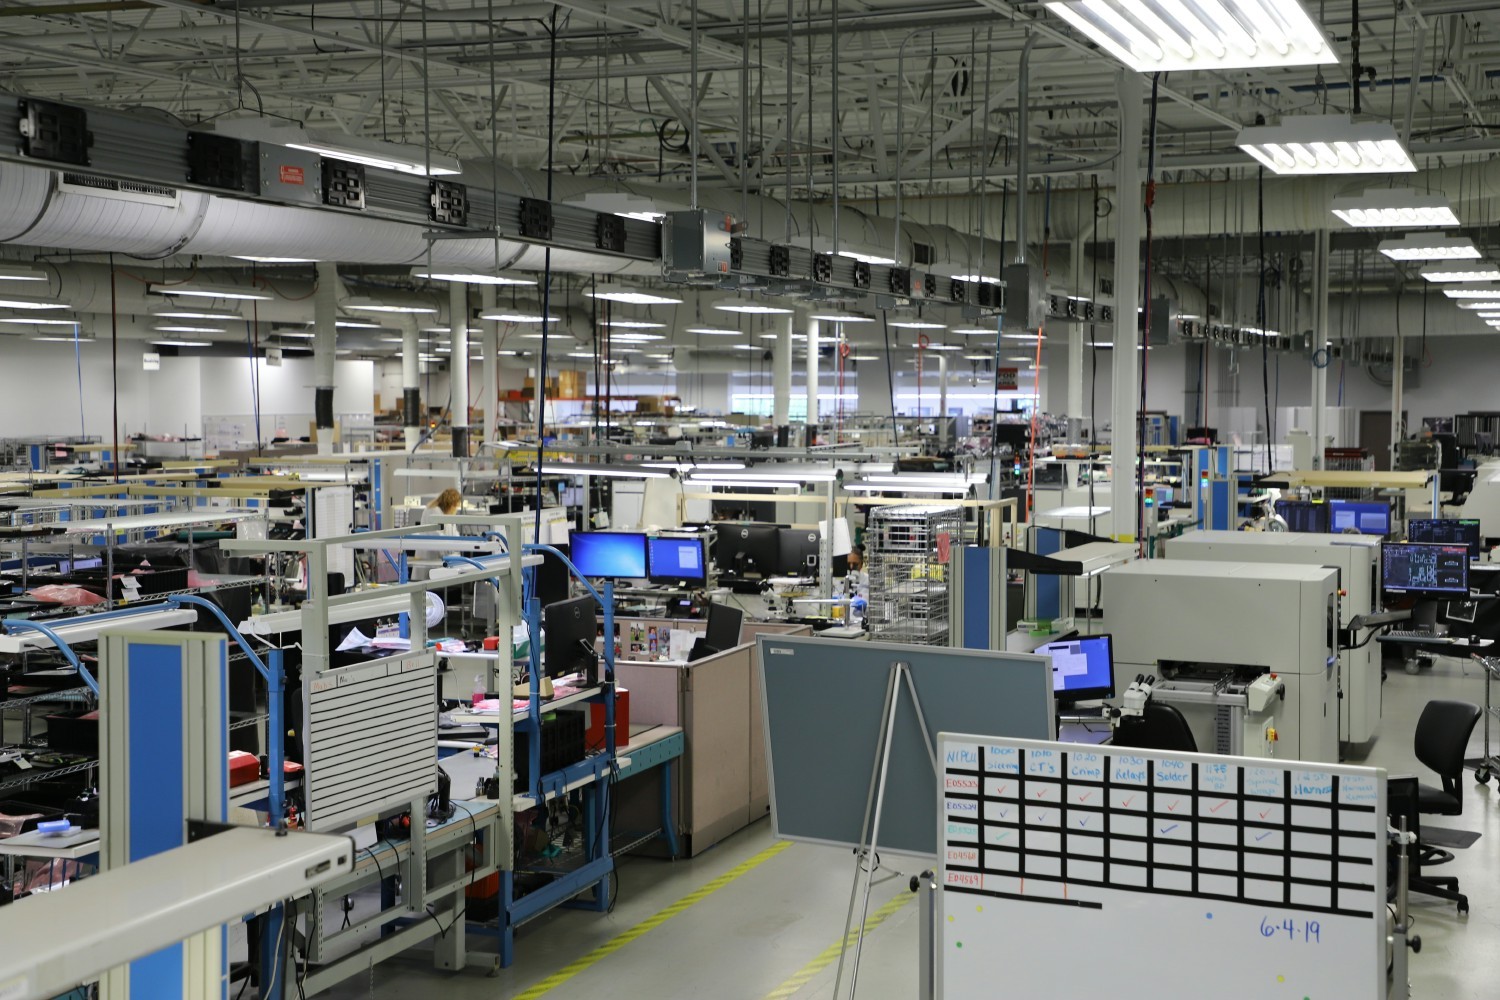 Ariel view of the production floor.